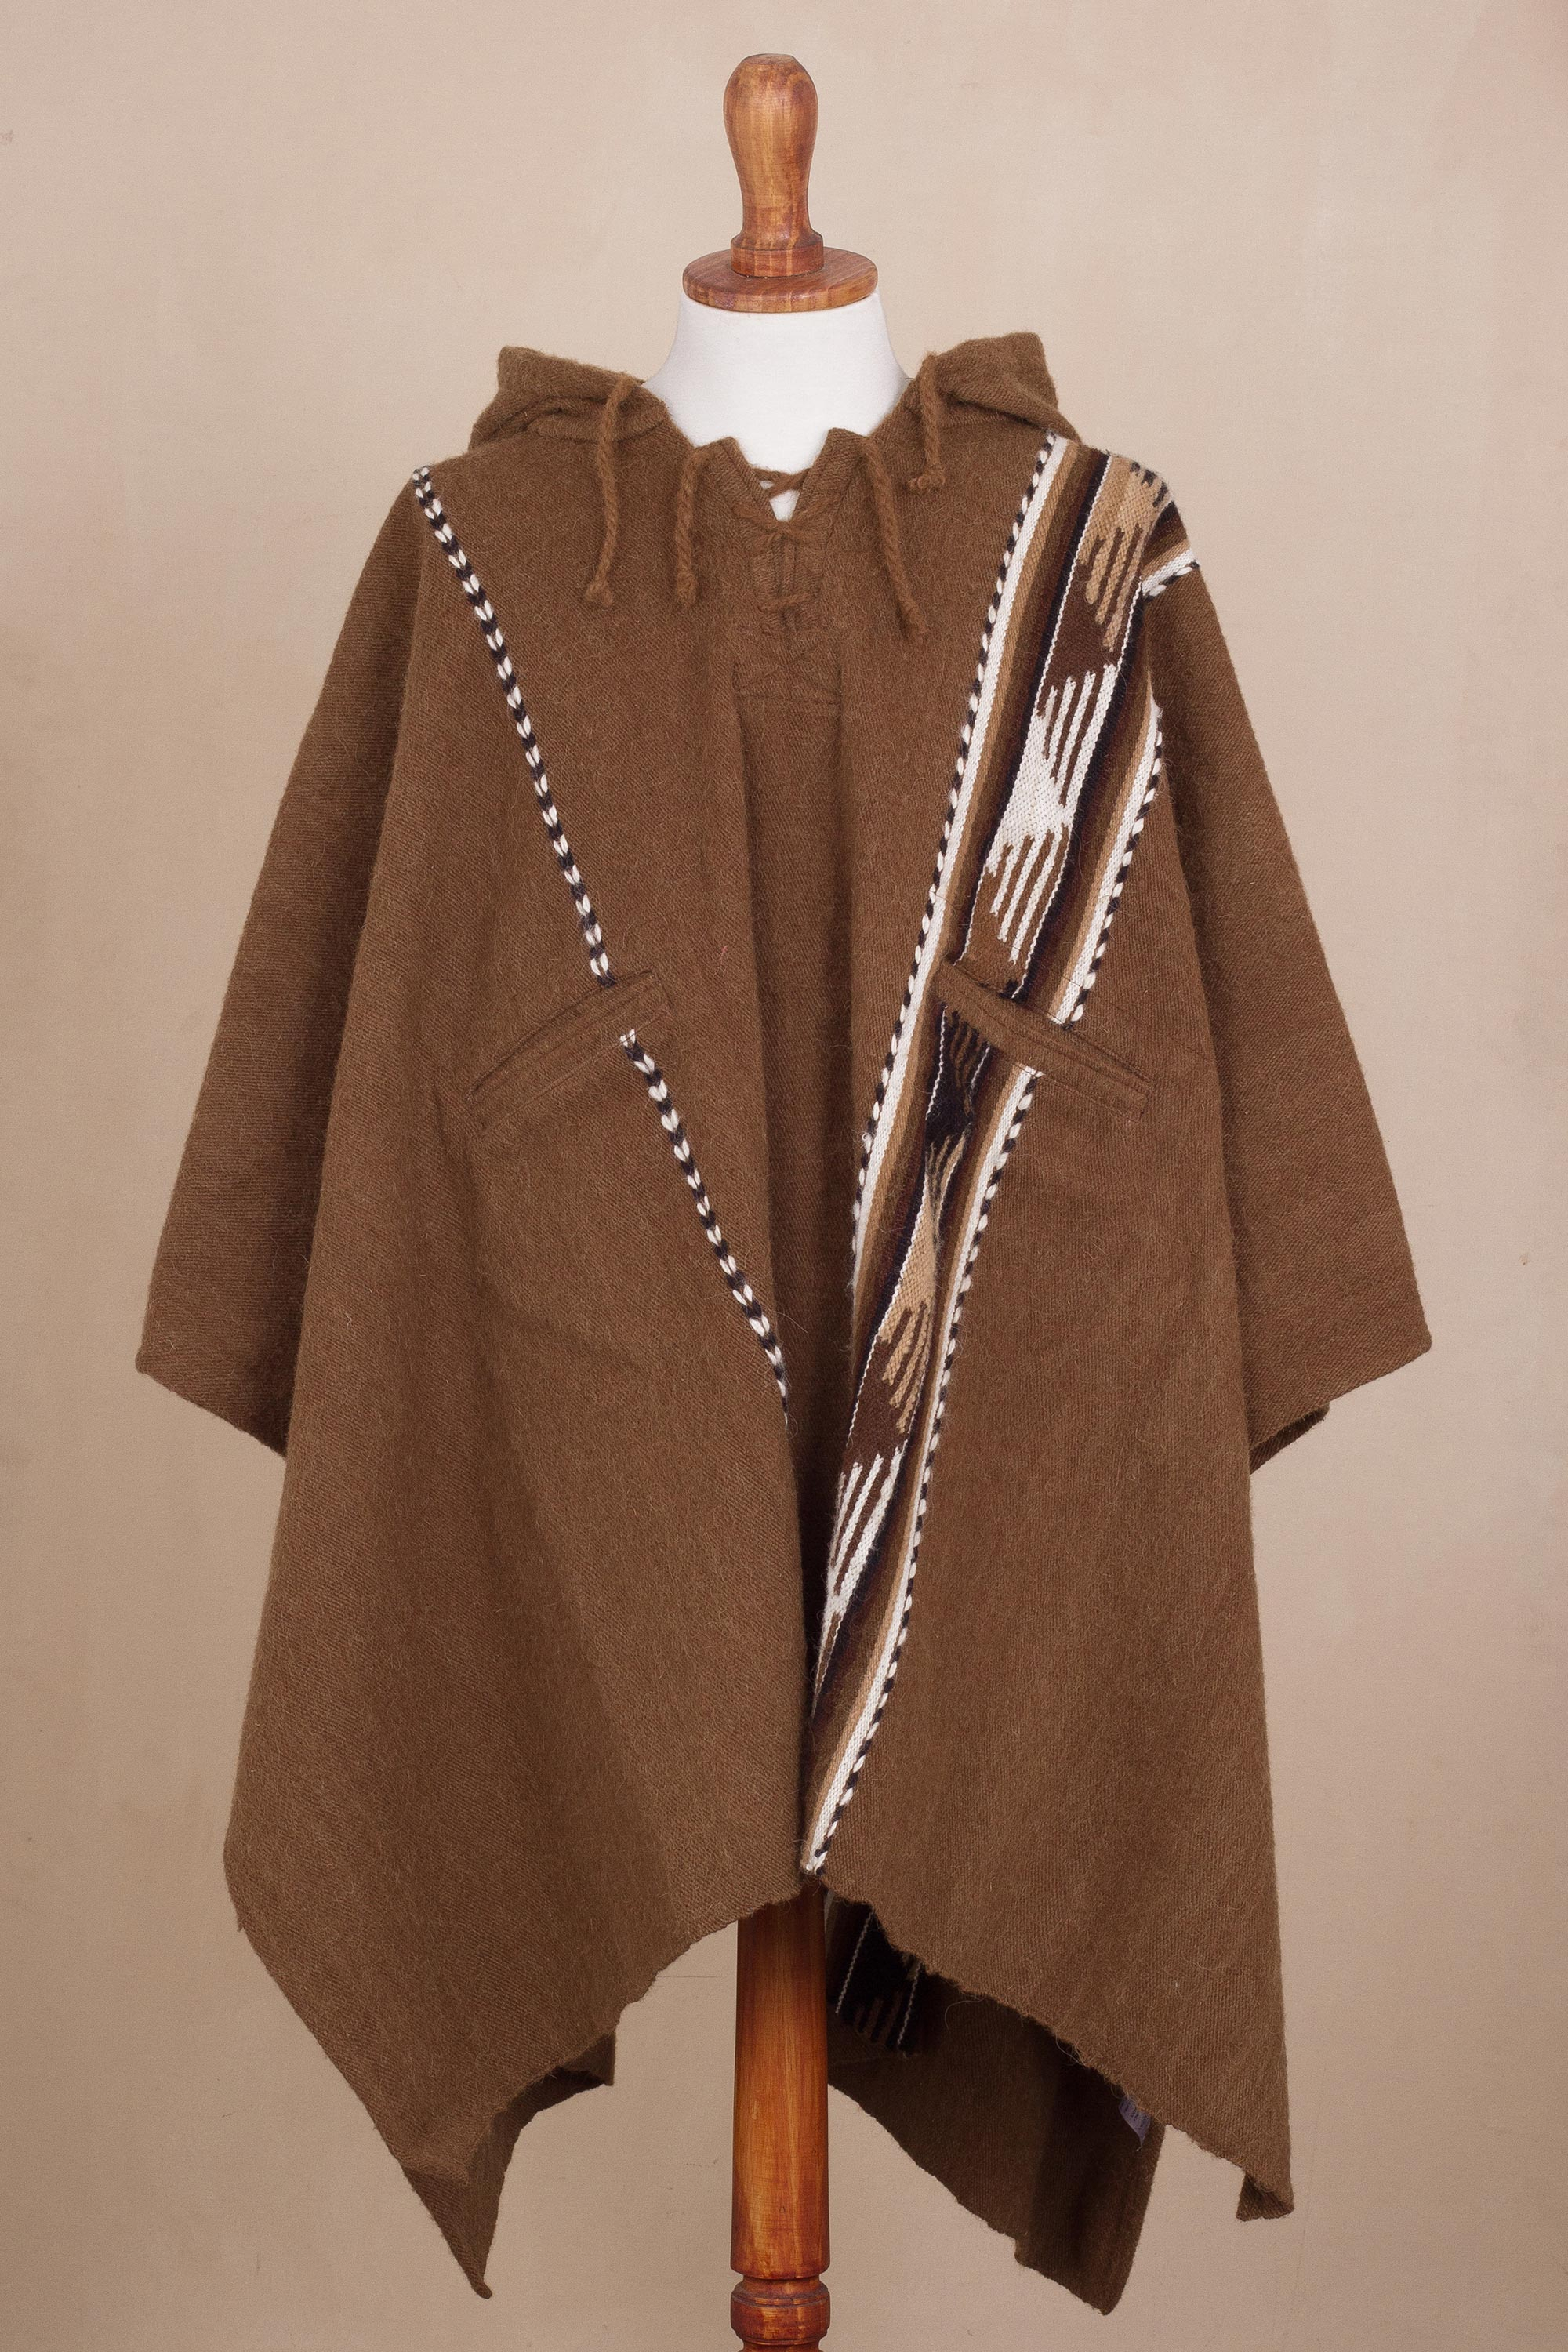 Handwoven Alpaca and Wool Blend Poncho from Peru - Chestnut Mountains ...